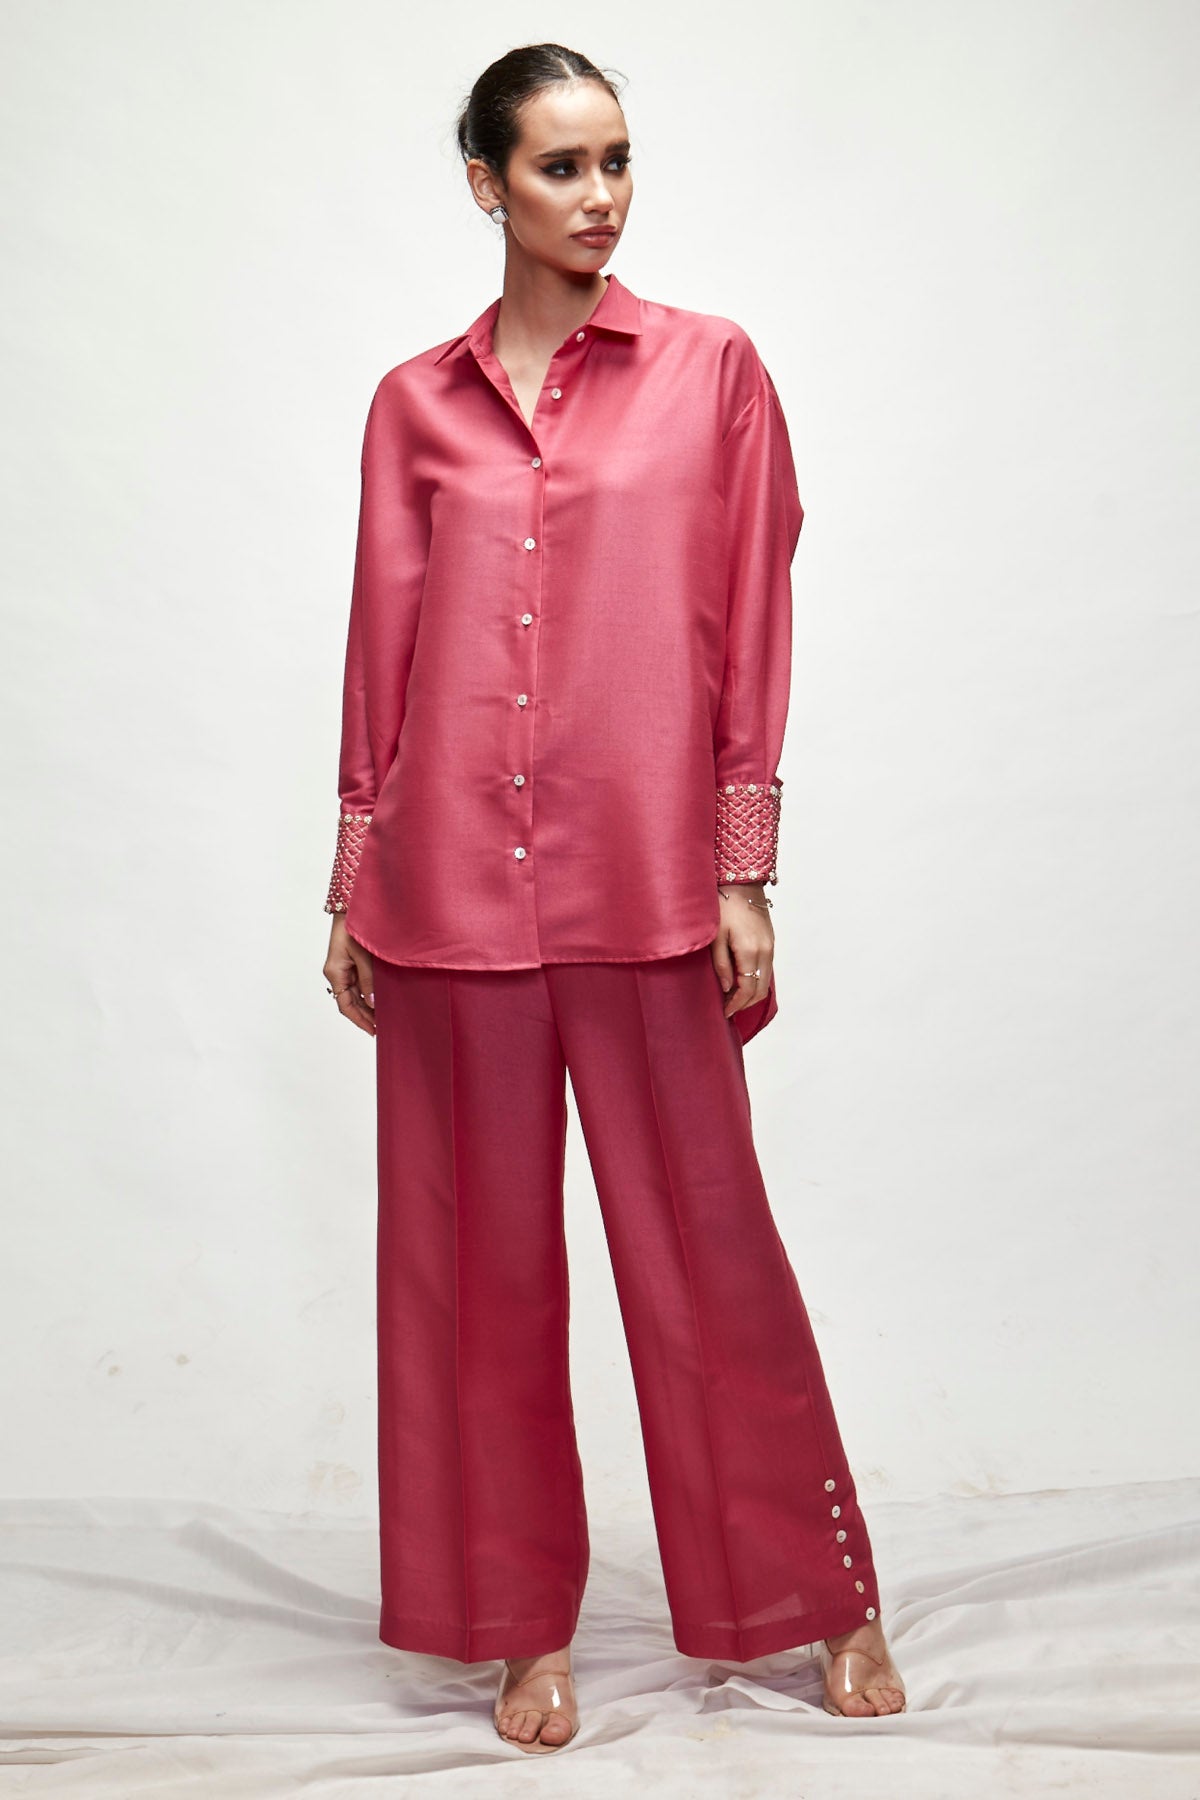 Designer Ranian Pink silk blend relaxed co-ord set with straight pants and shirt with broad cuffs and pearls For Women Online at ScrollnShops